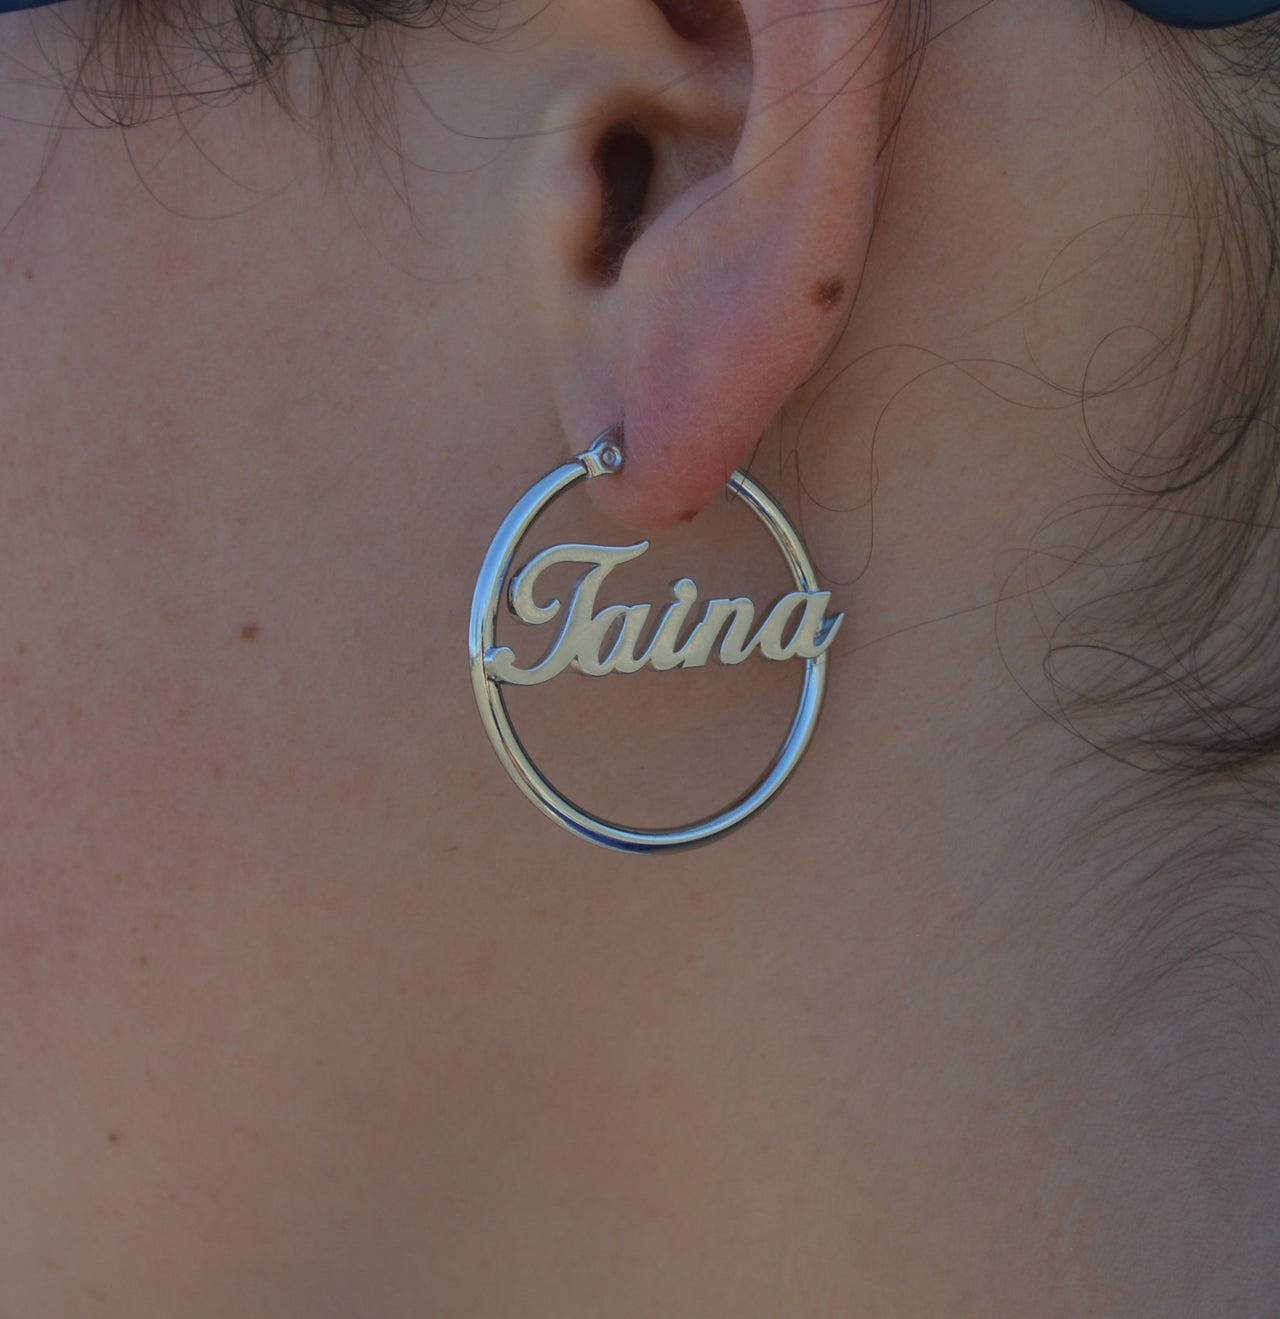 Taina 1" Hoop Earrings (Gold or Silver)